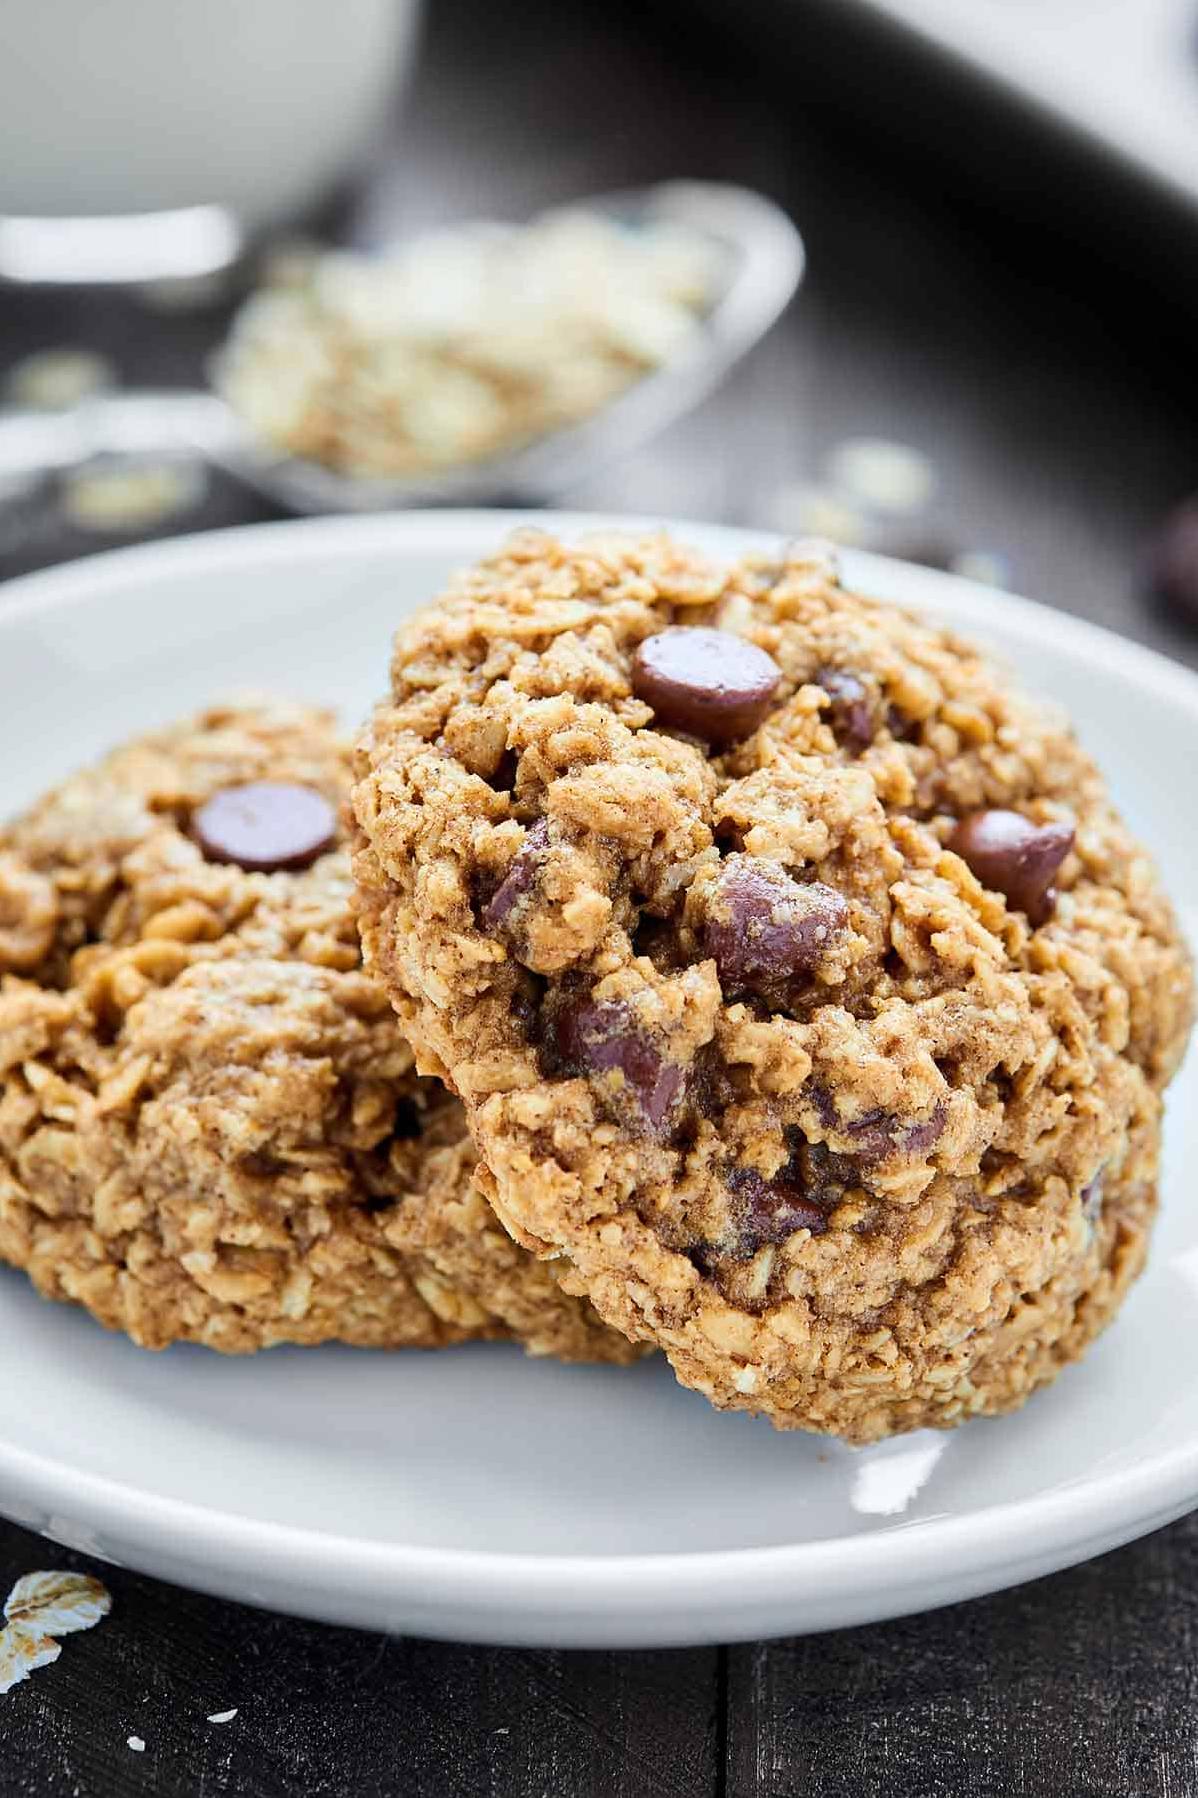  Bite into the perfect combination of nutty and sweet with our pecan-studded cookies.